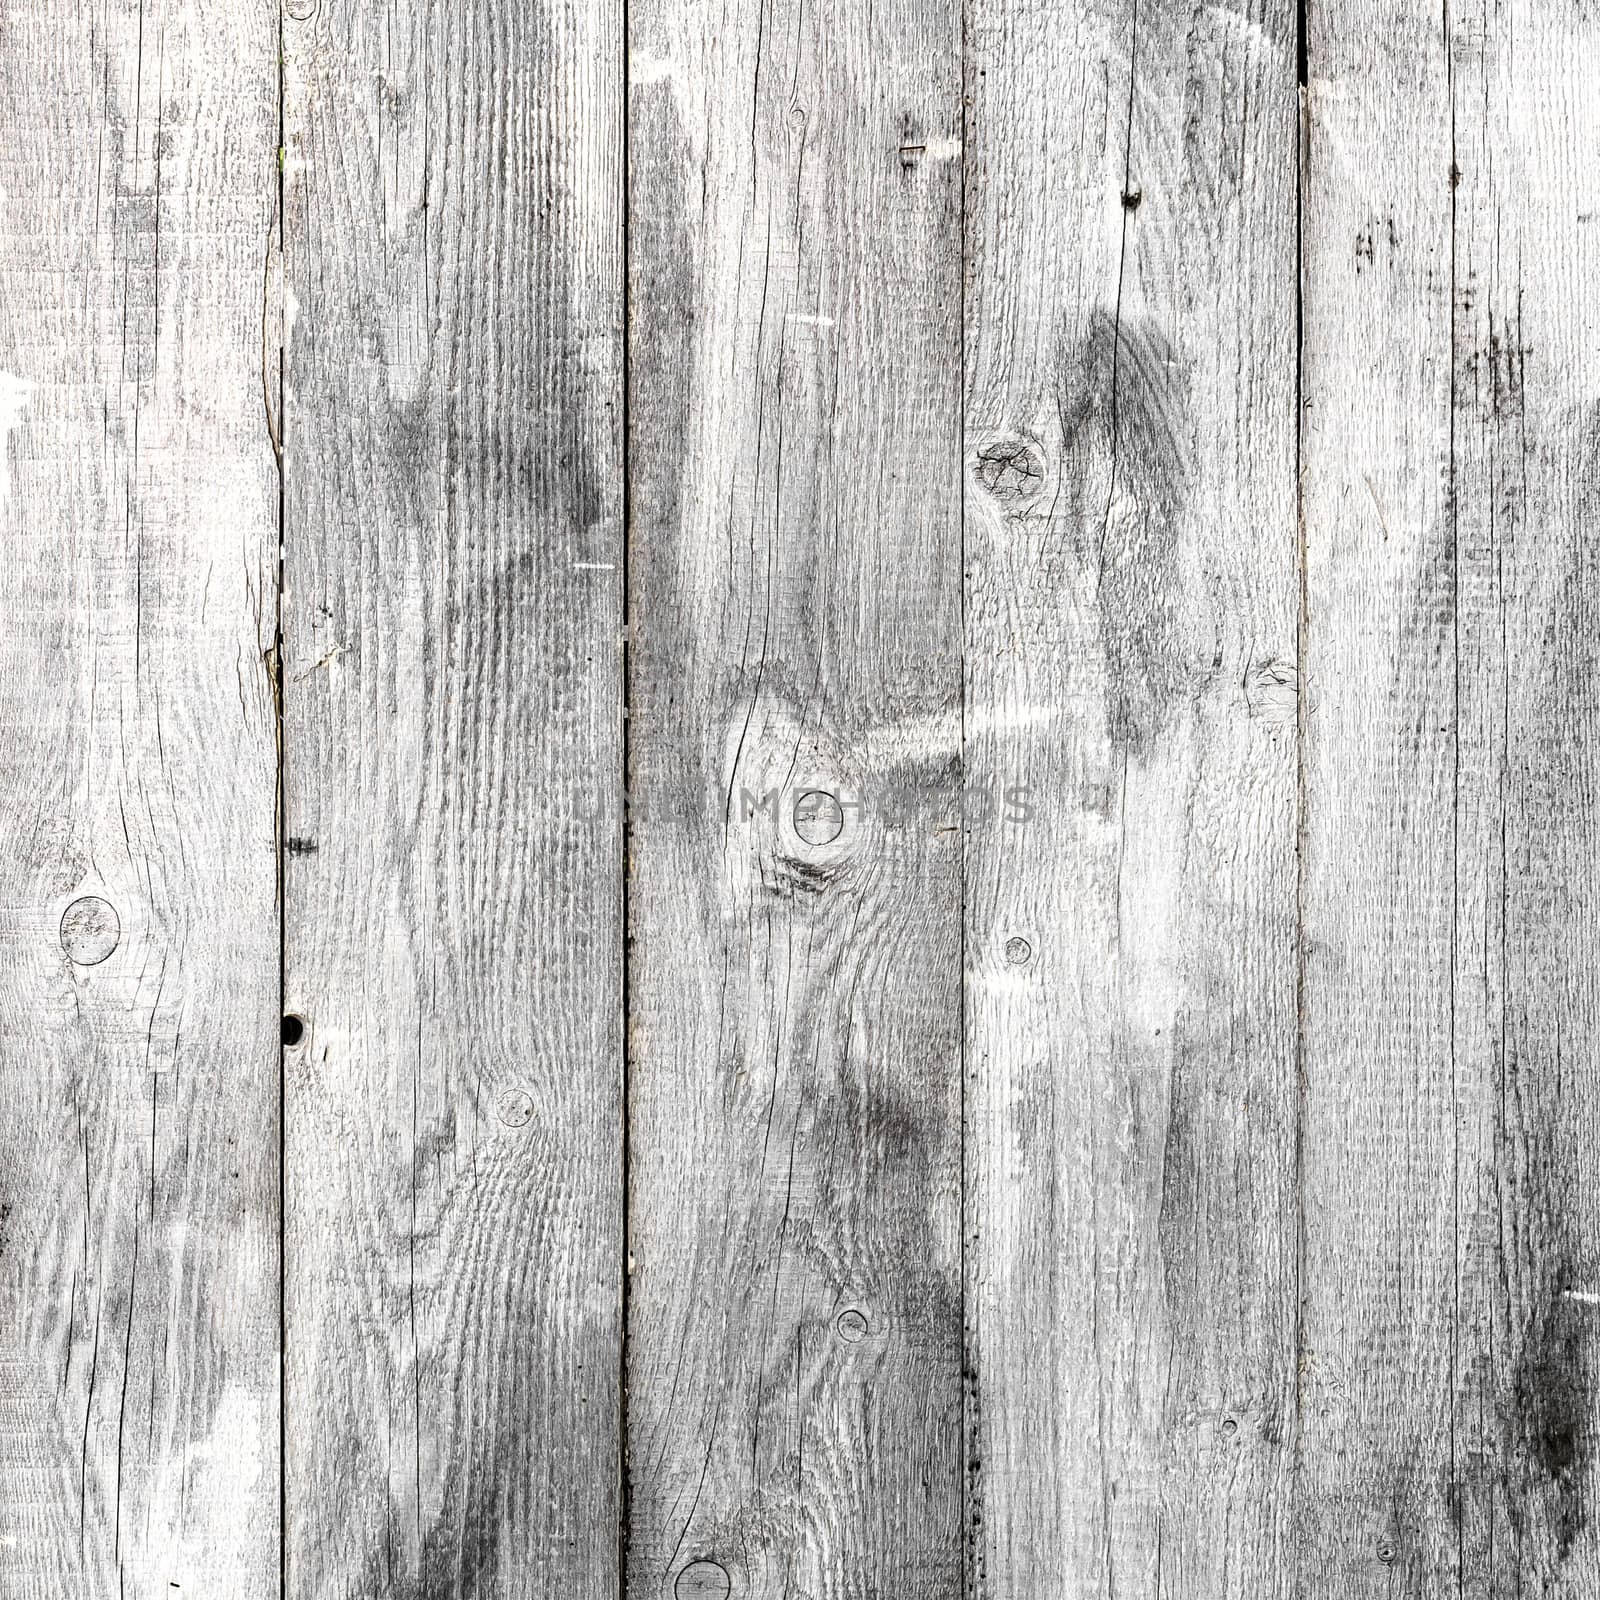 White wood texture backgrounds old vintage scratched weathered wooden wall